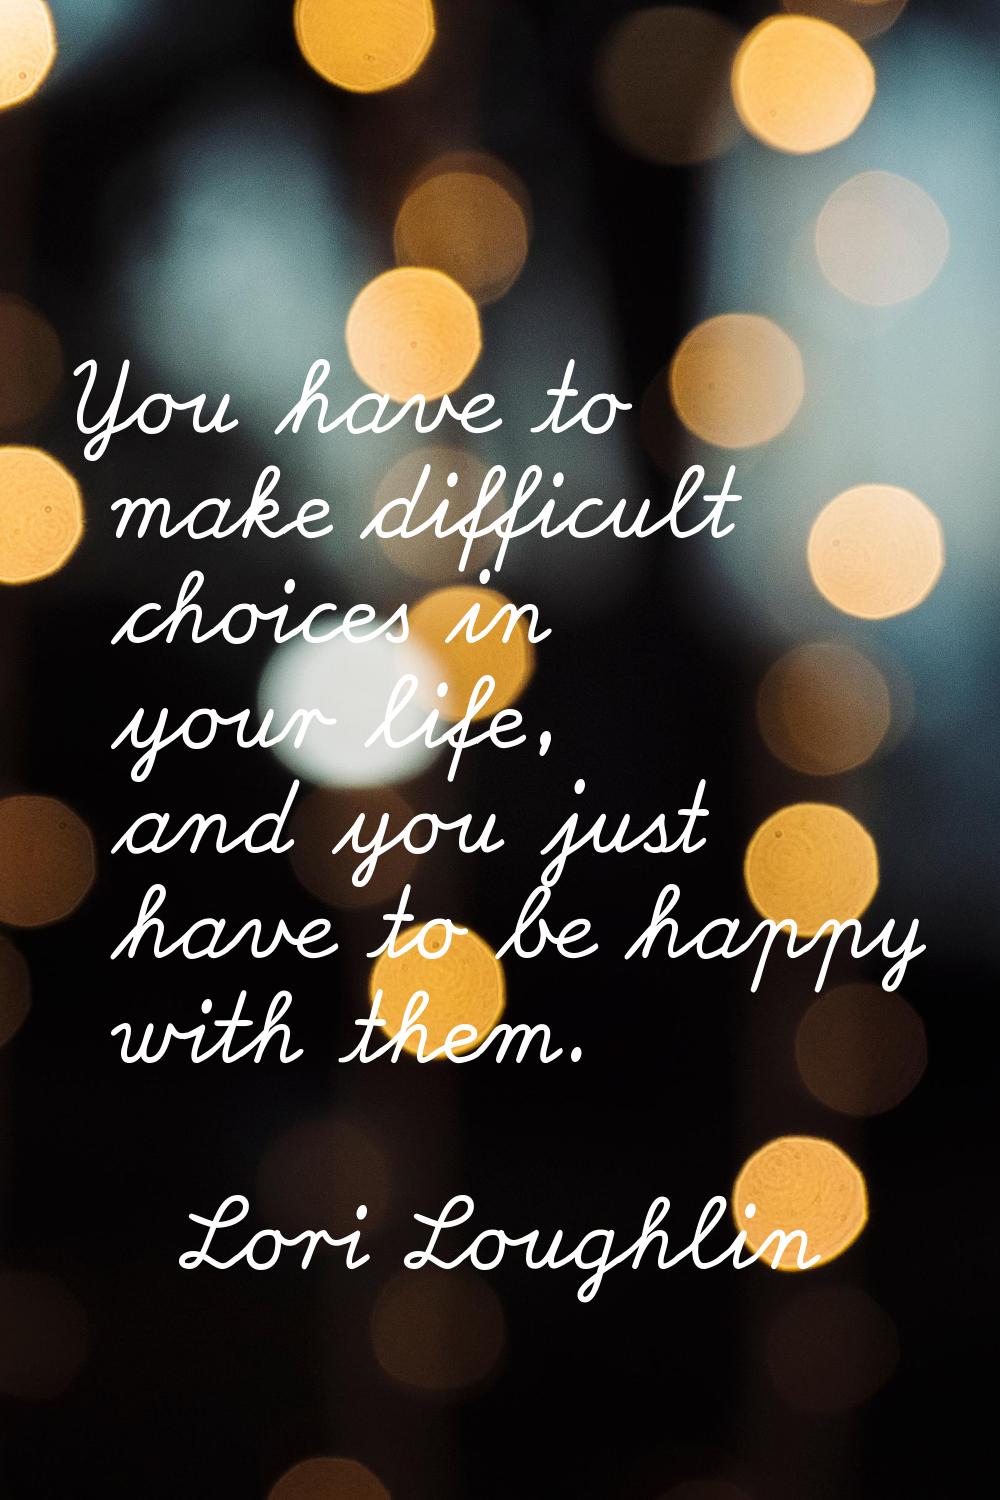 You have to make difficult choices in your life, and you just have to be happy with them.